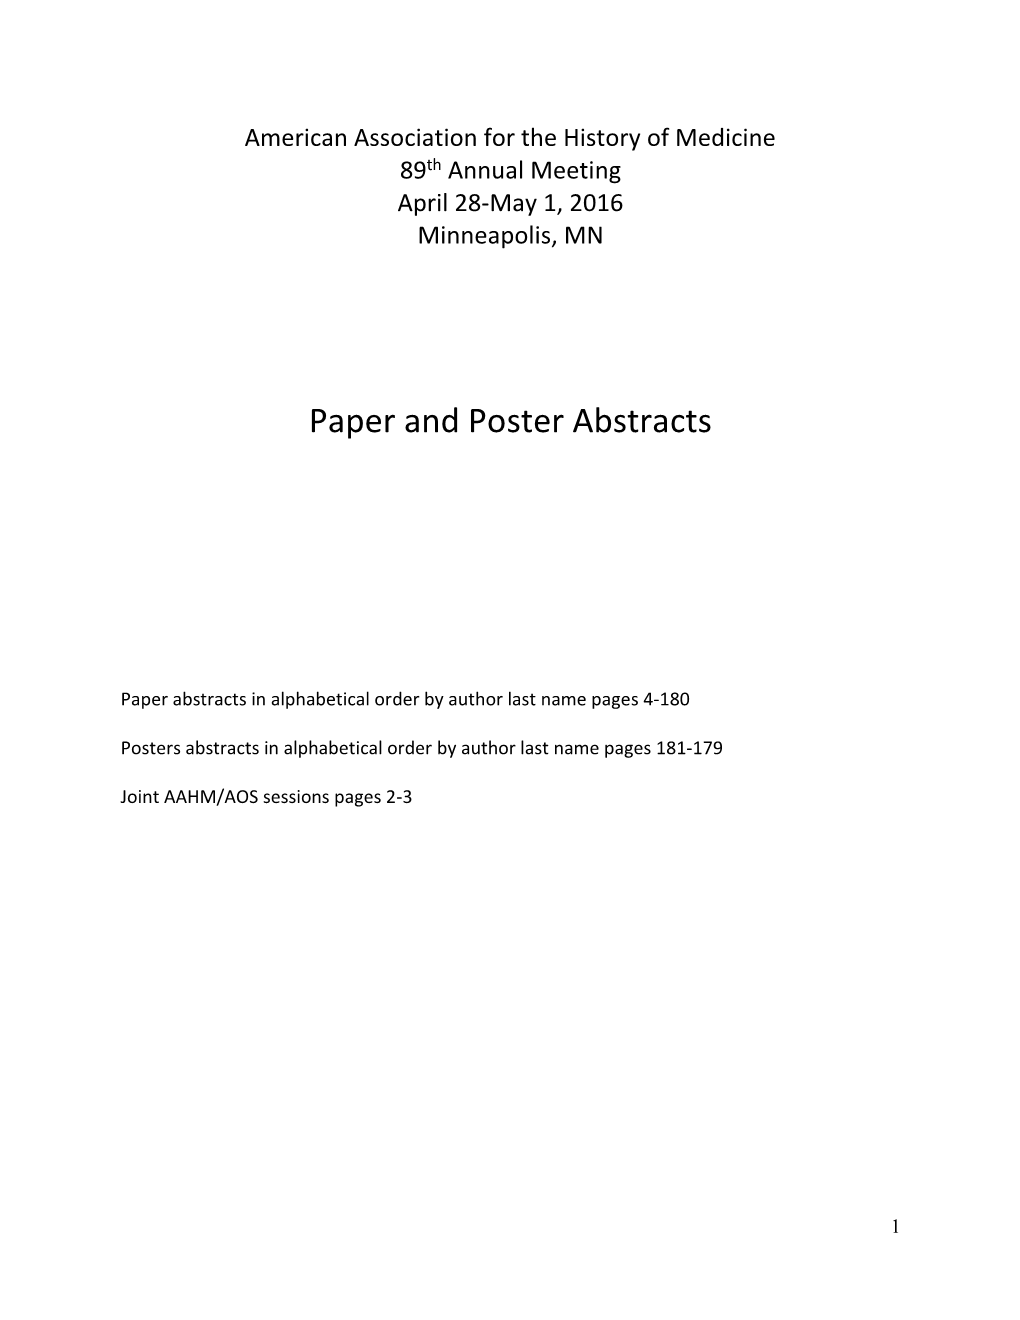 Paper and Poster Abstracts